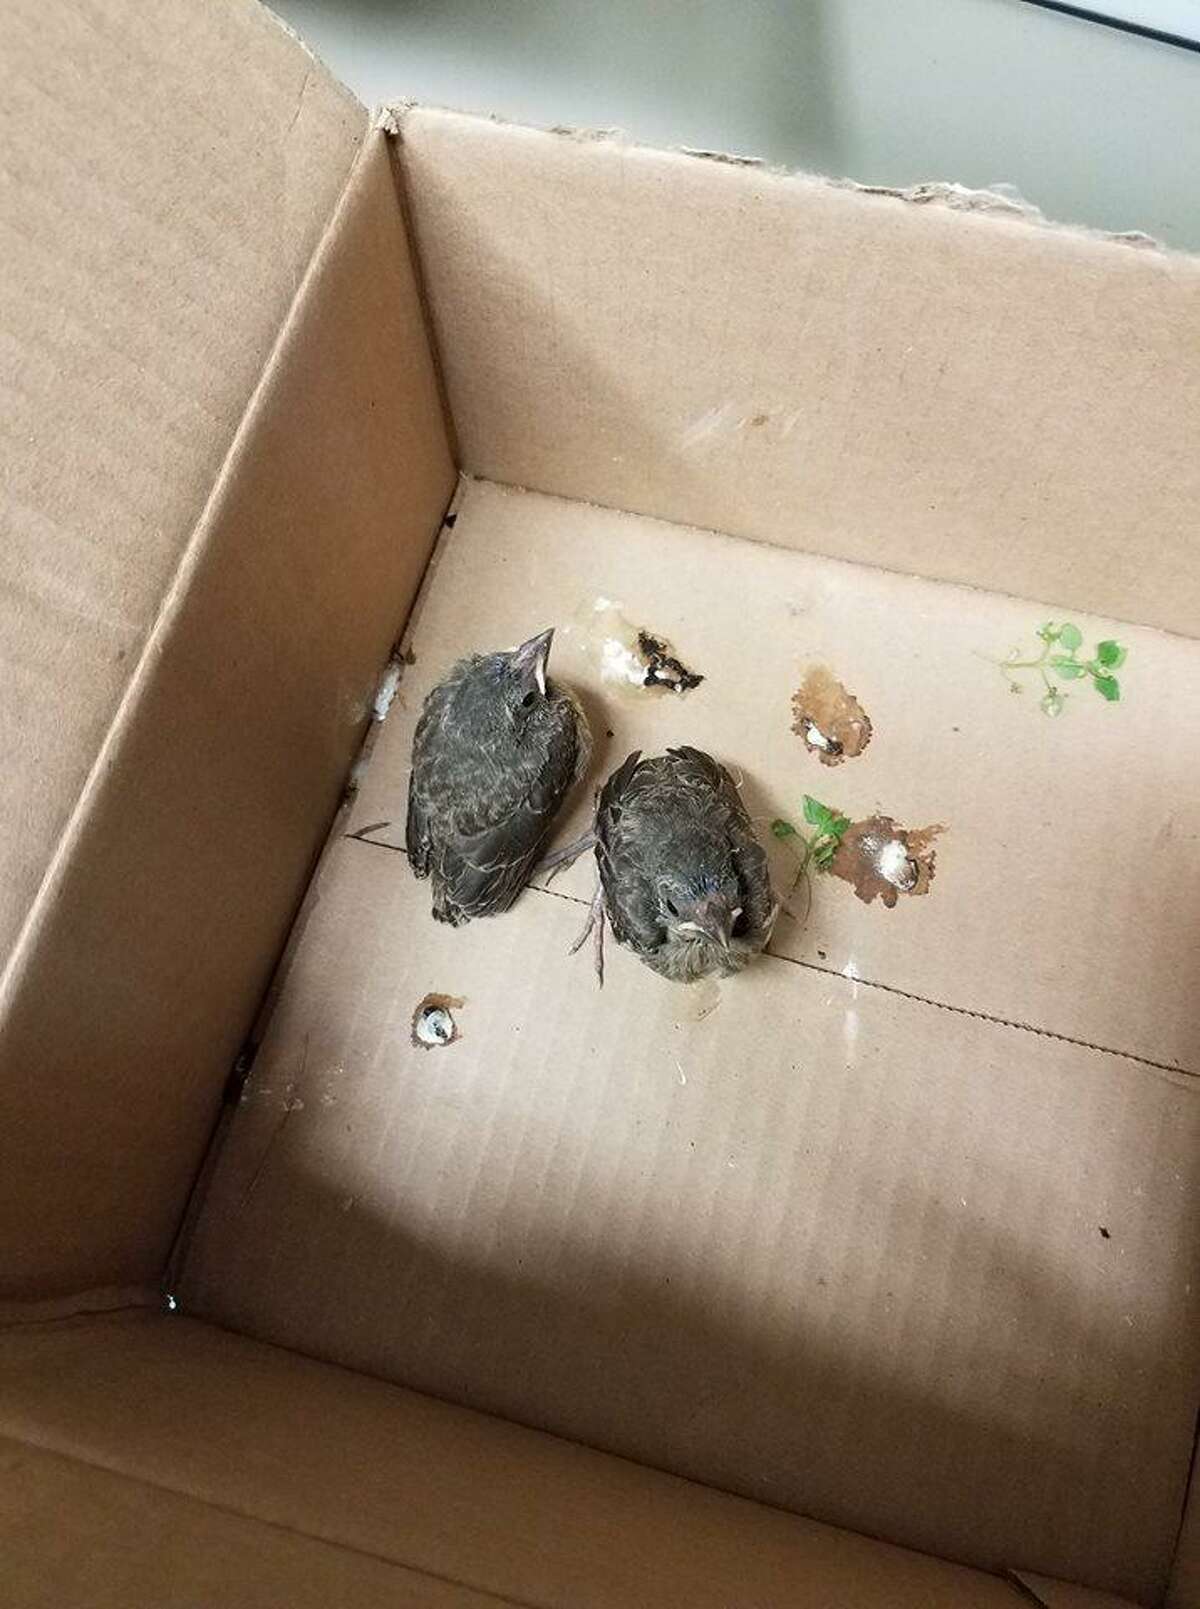 These fledgling house sparrows were left in a box at the Ansonia Nature Center, which, the center's staff stated in a Facebook post, could impede the birds' development.